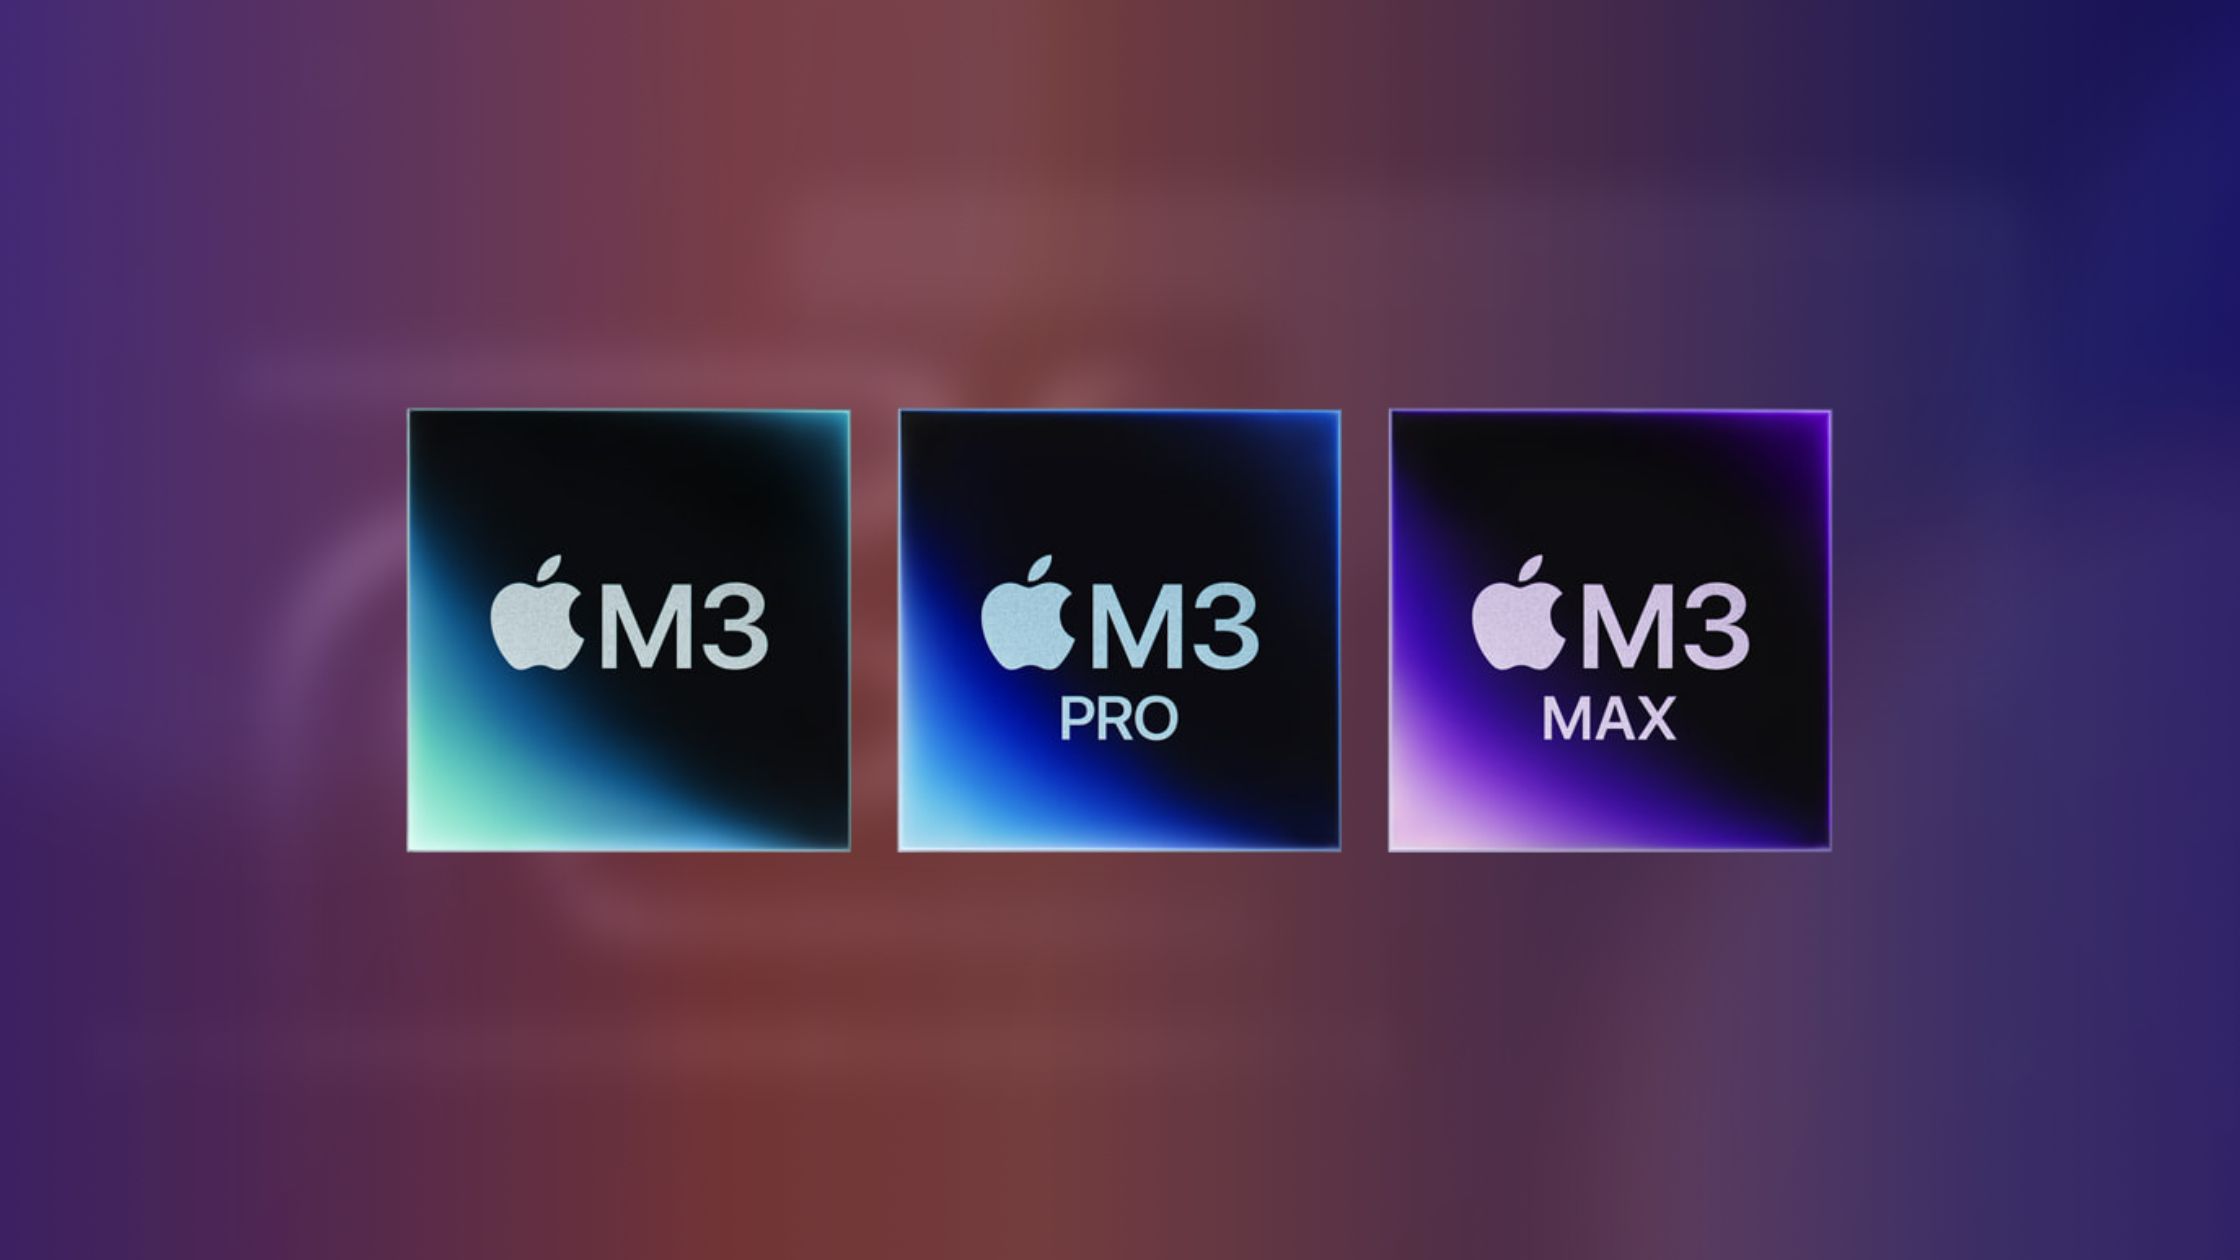 Apple introduces M3 Chip with new MacBook Pro and iMac models for music production